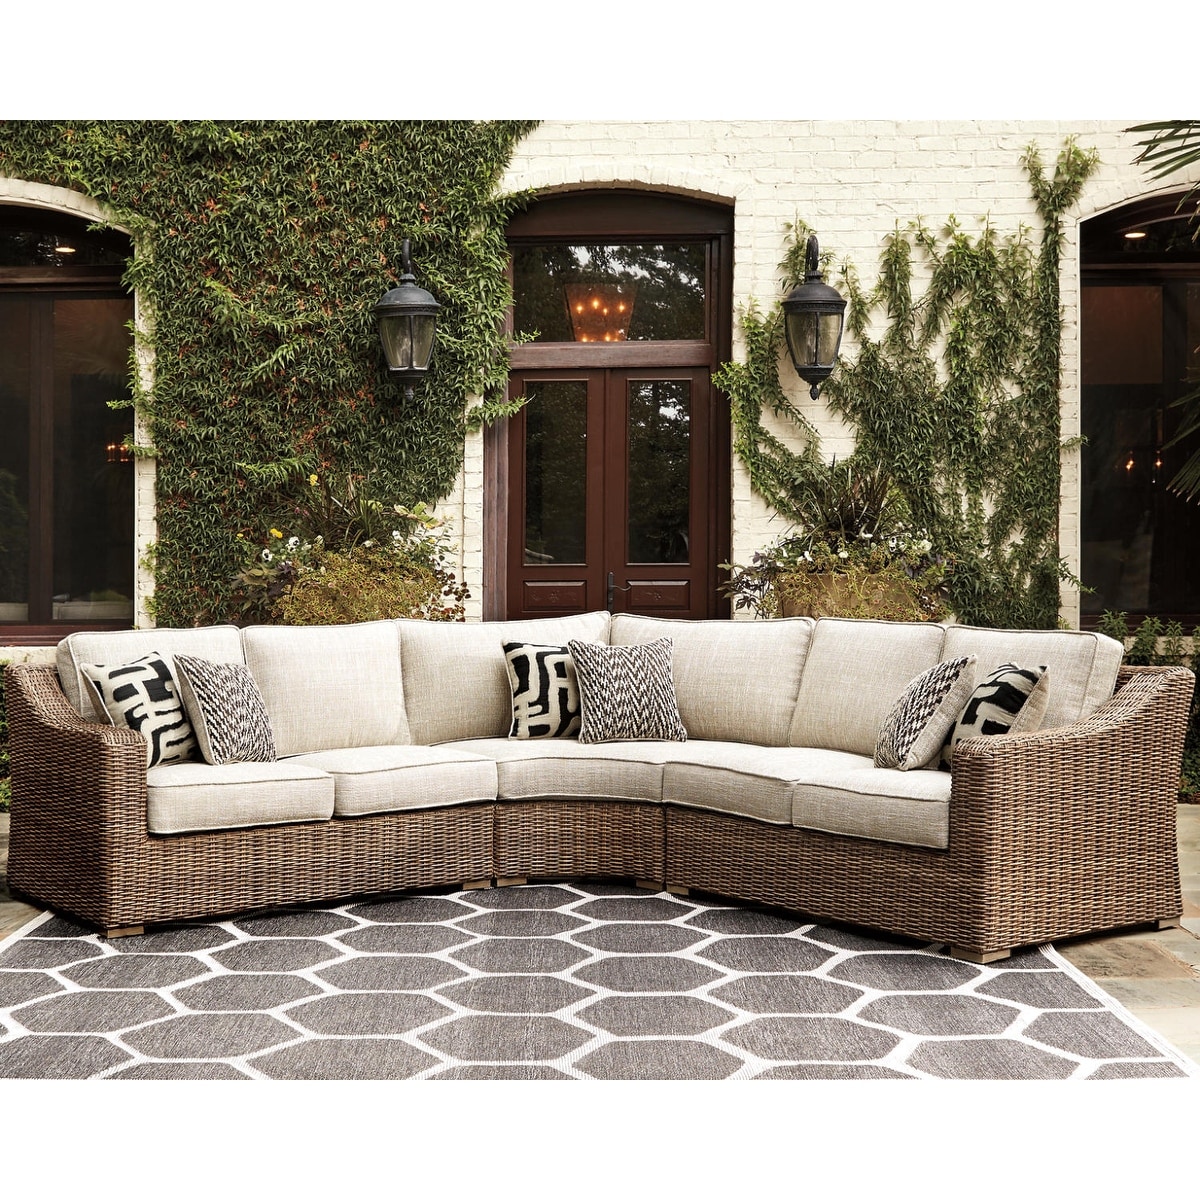 Signature Design by Ashley Beachcroft Beige Outdoor Sectional - On Sale -  Bed Bath & Beyond - 26396066